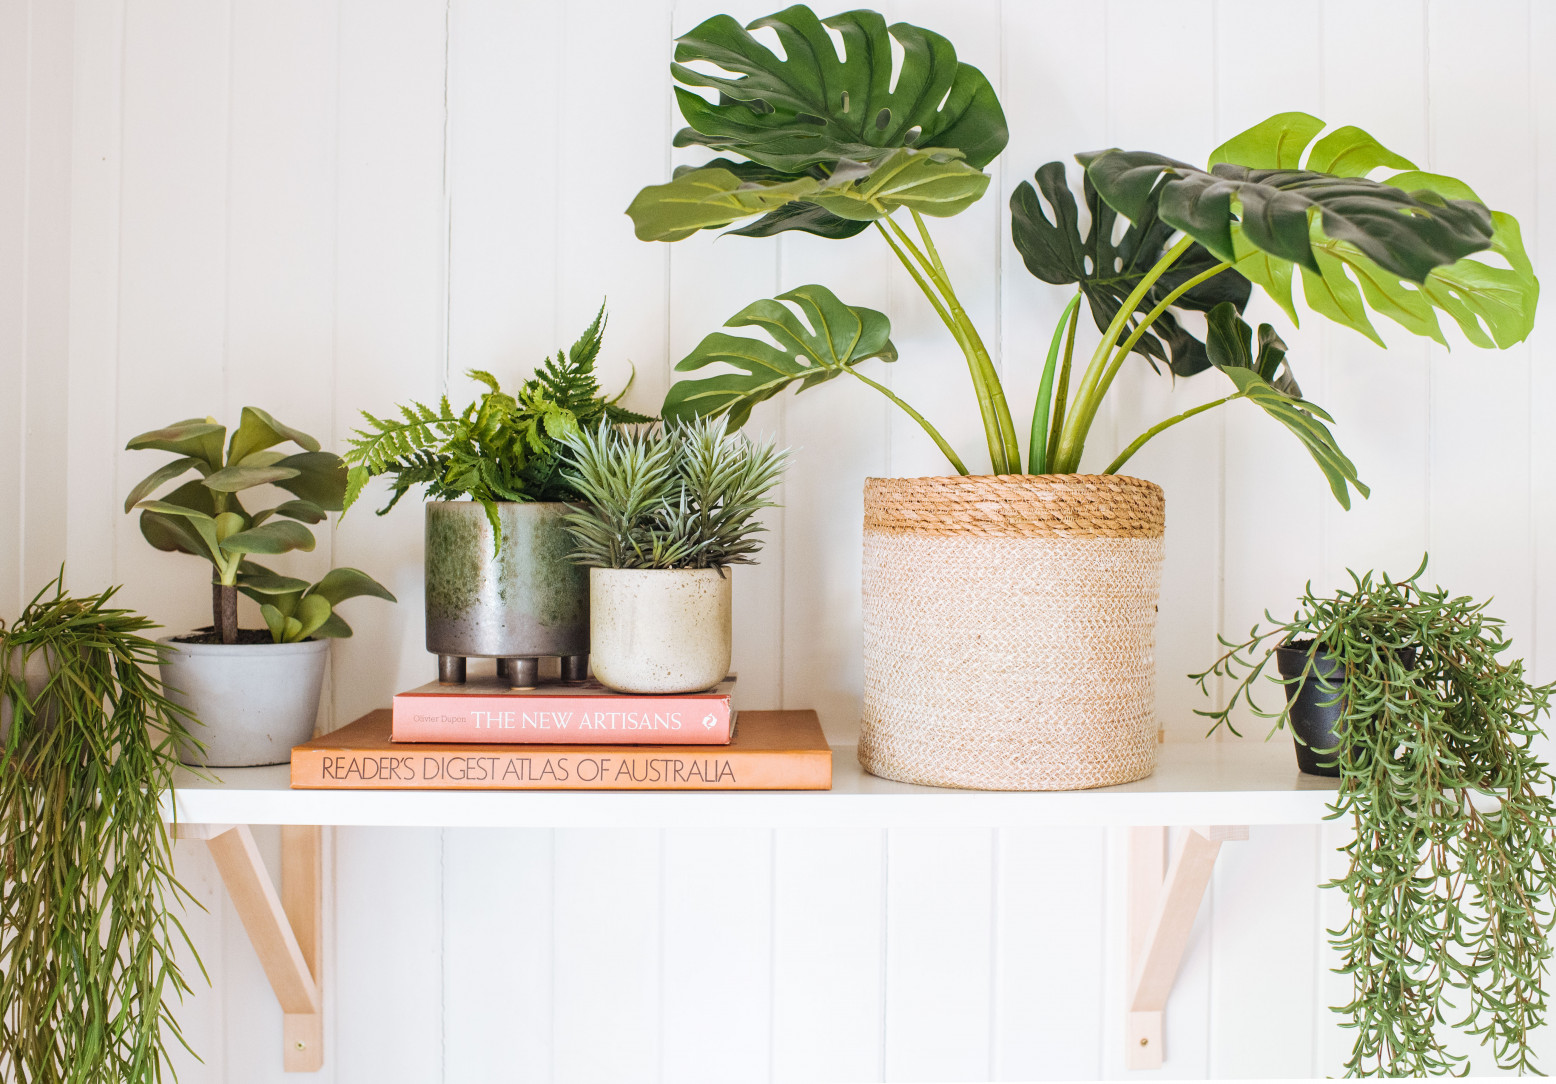 Tips & Tricks for Decorating With Fake Plants